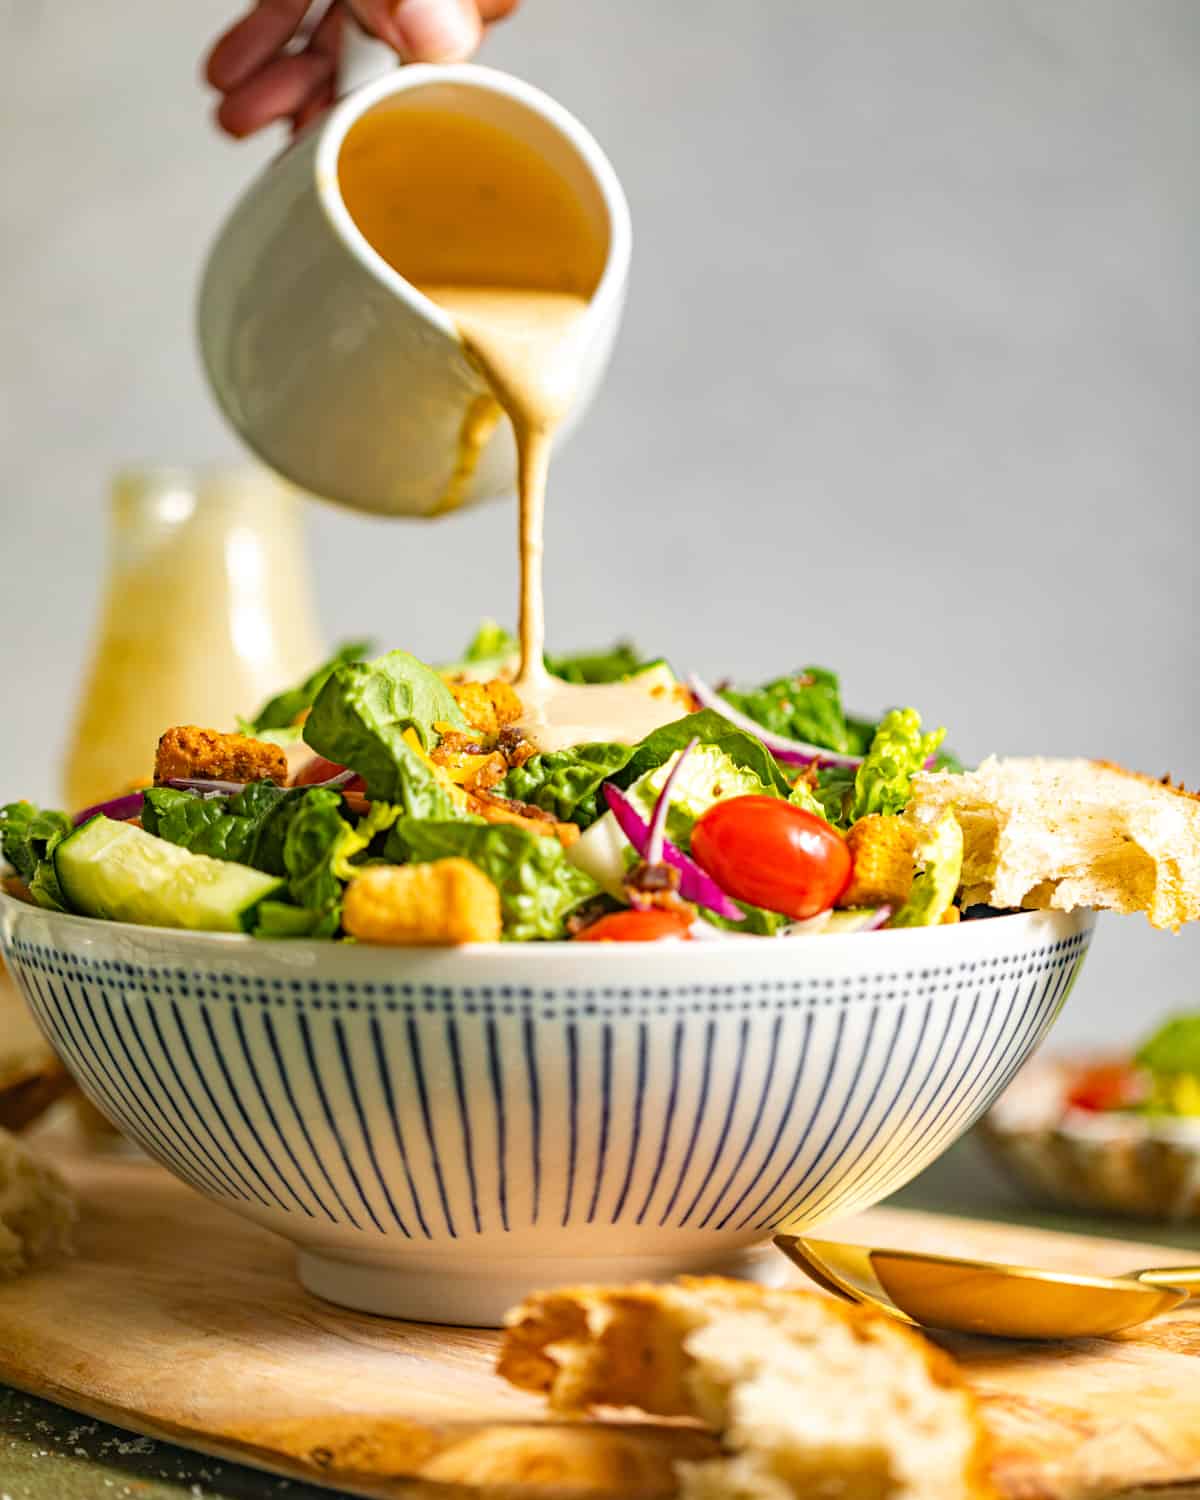 creamy balsamic dressing in a glass being poured on top of a salad in a bowl.